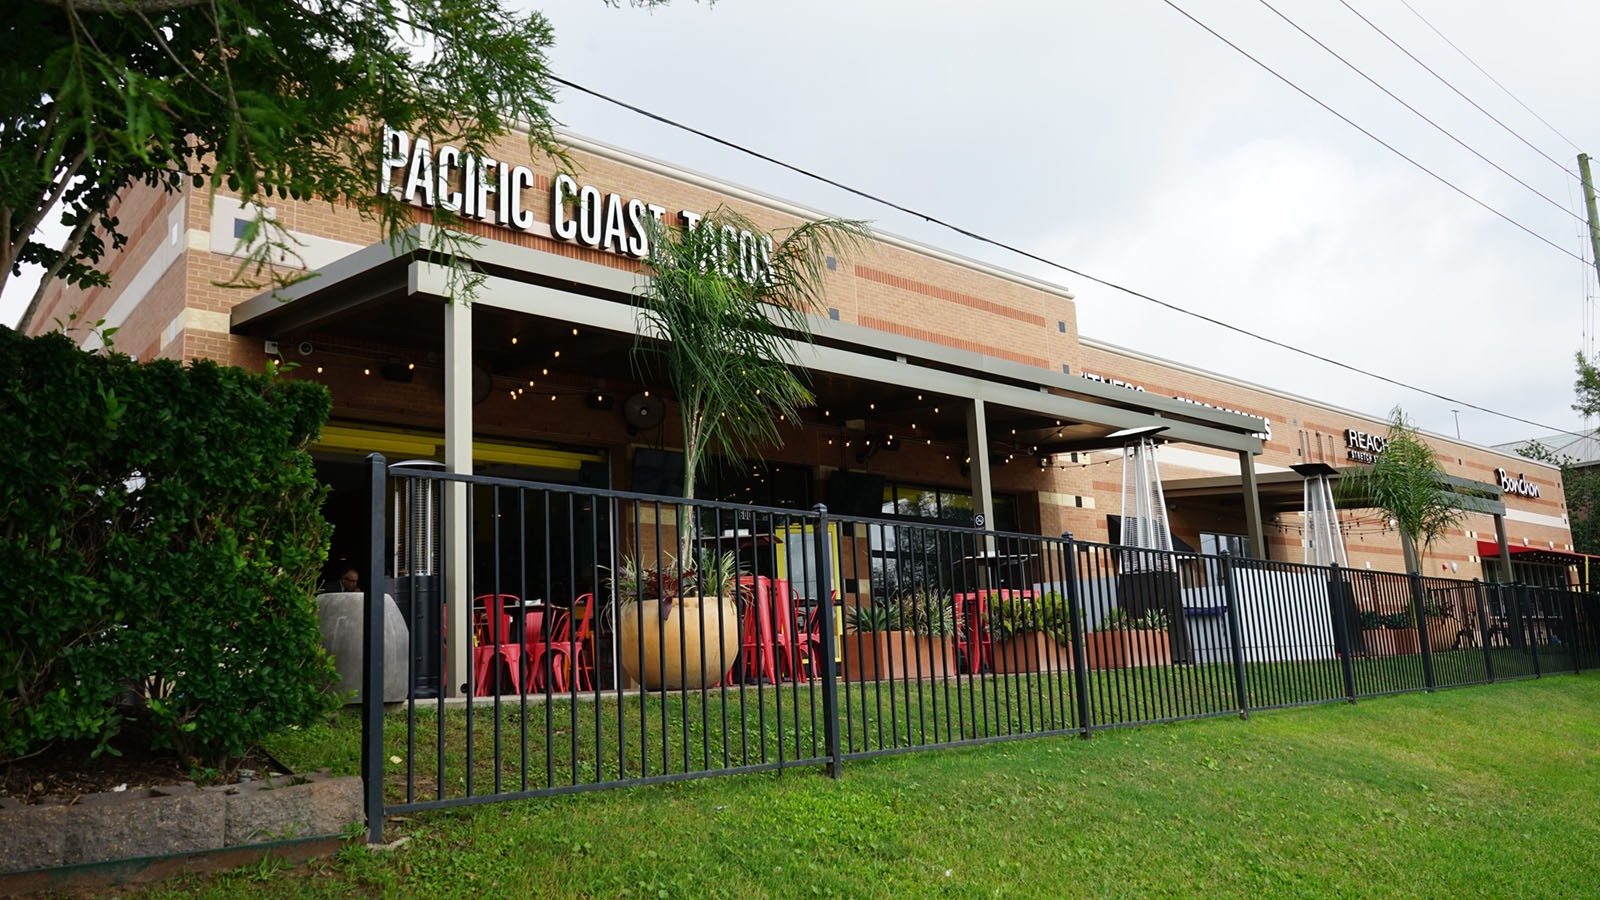 Lake Pointe Village East | Pacific Coast Tacos back patio overlooking Oyster Creek.